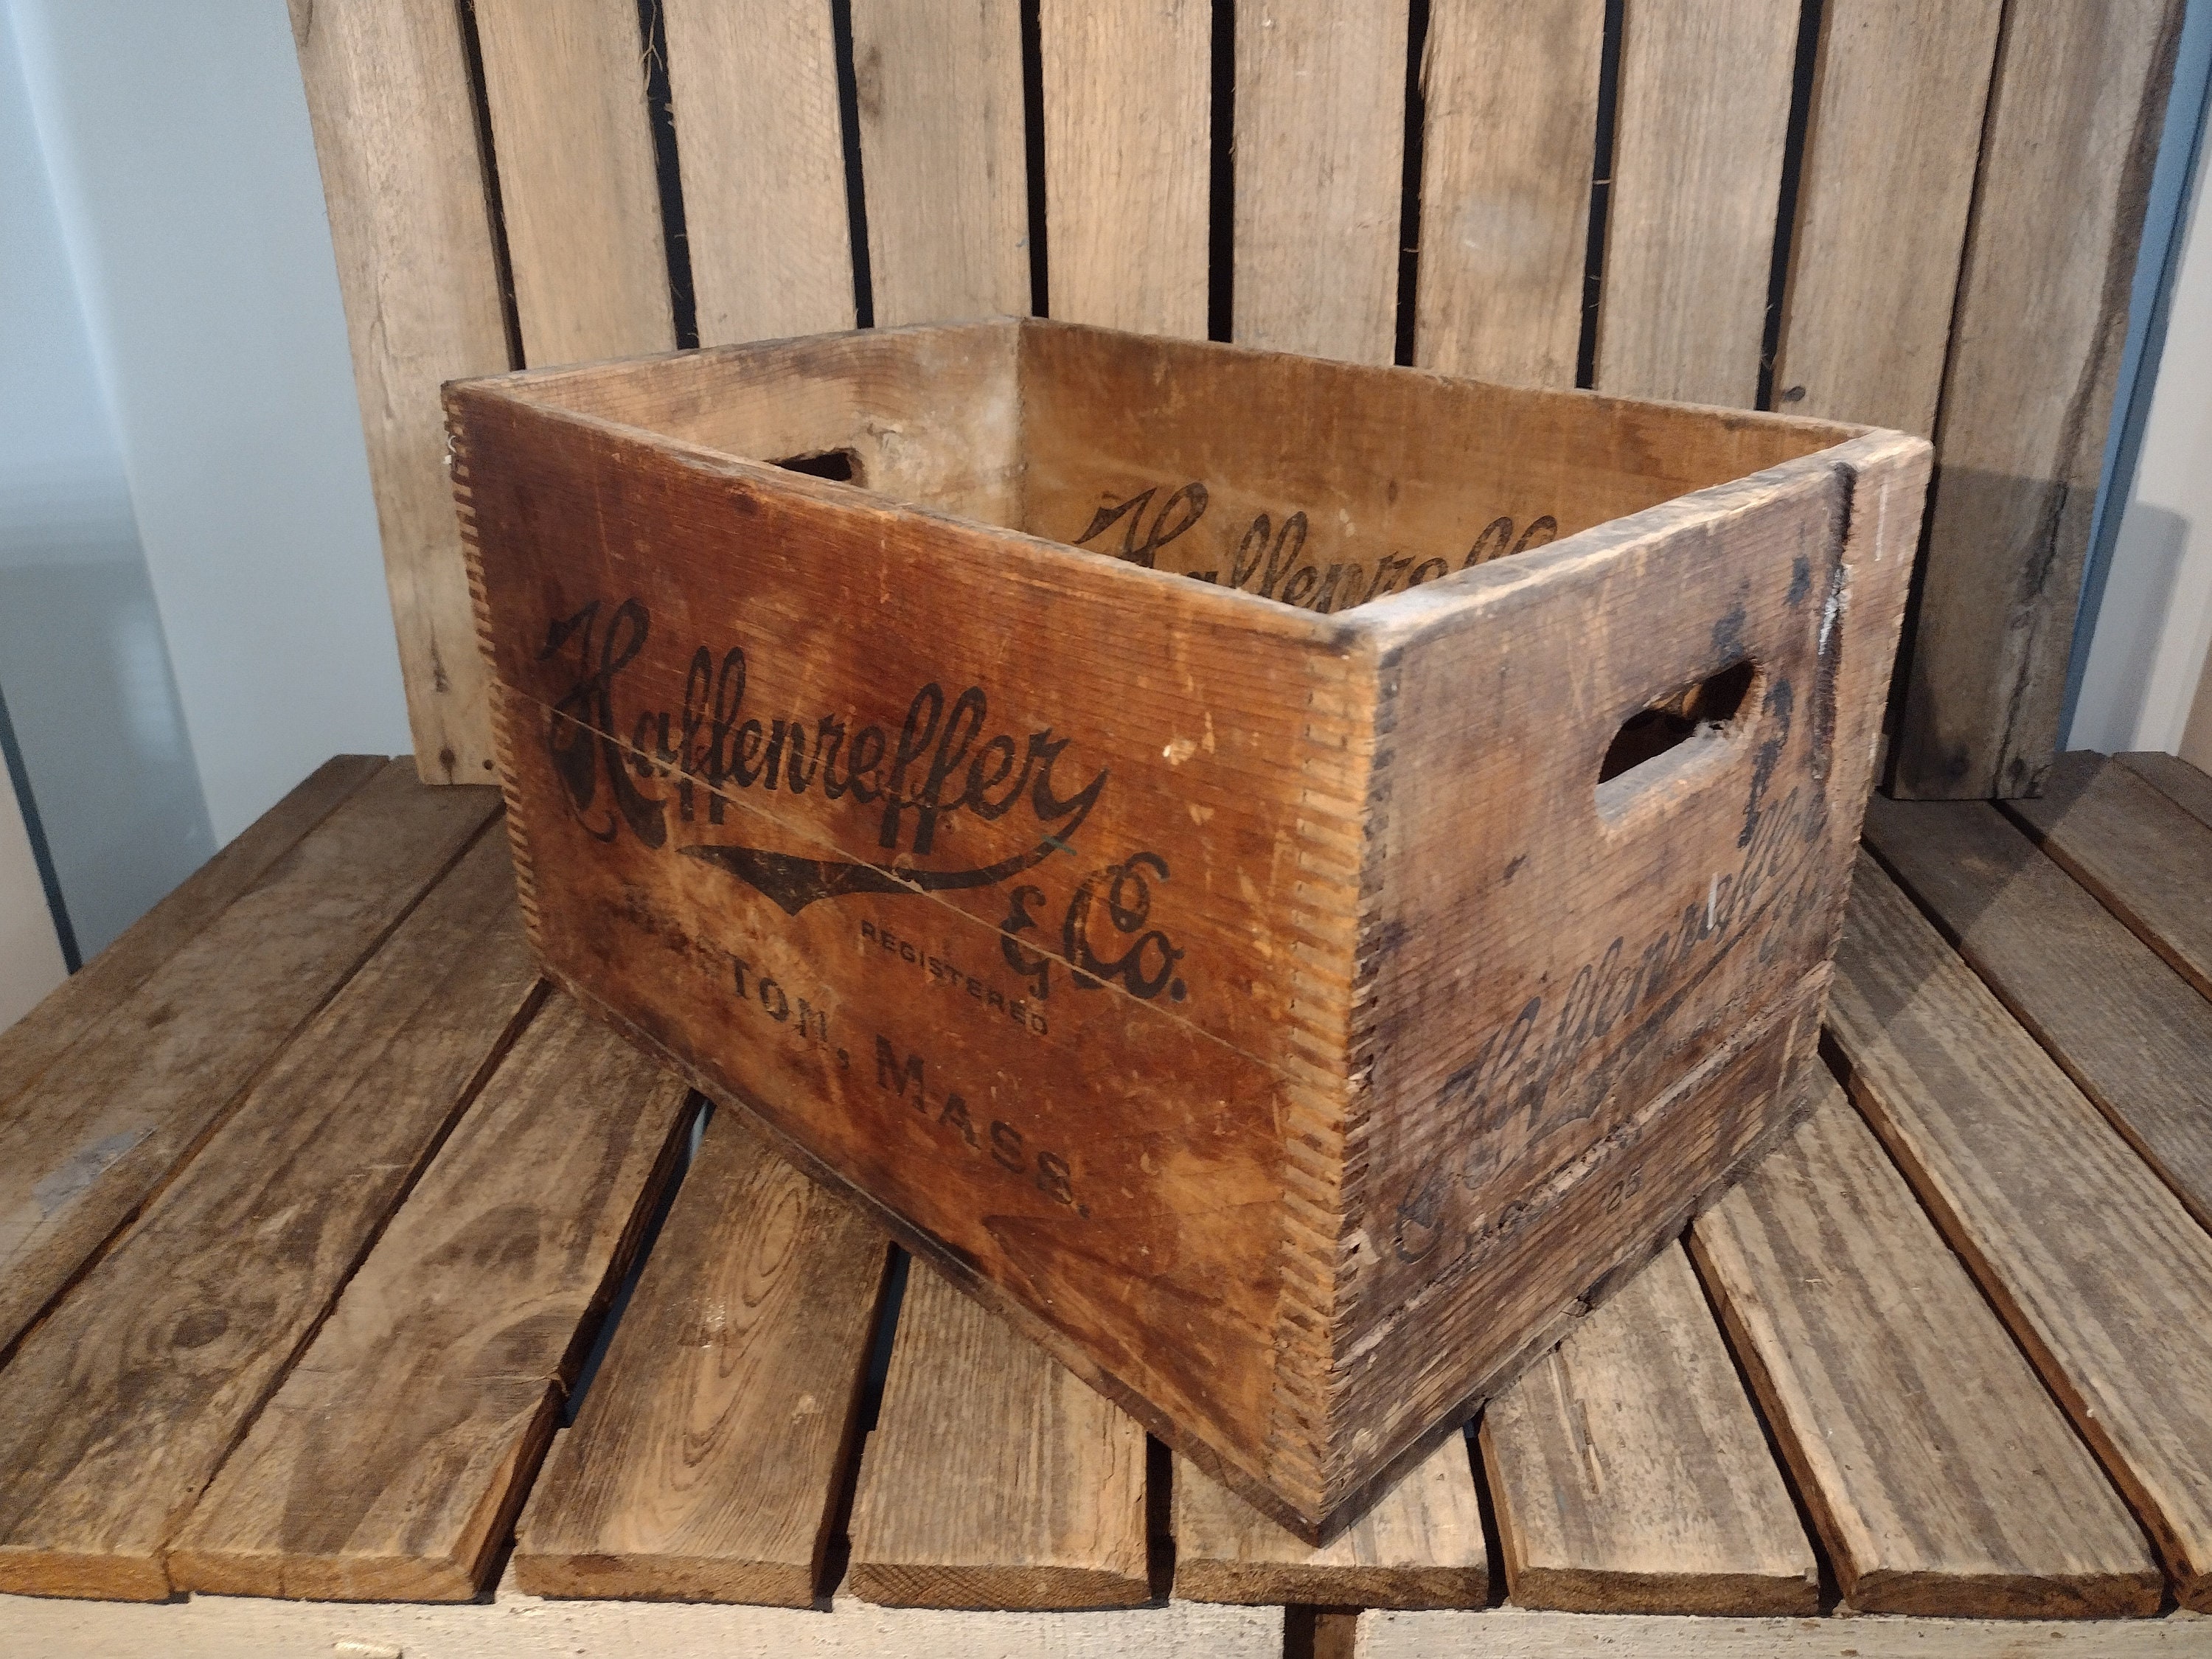 Fell Brewery Carbondale Pa Beer Wood Crate Box